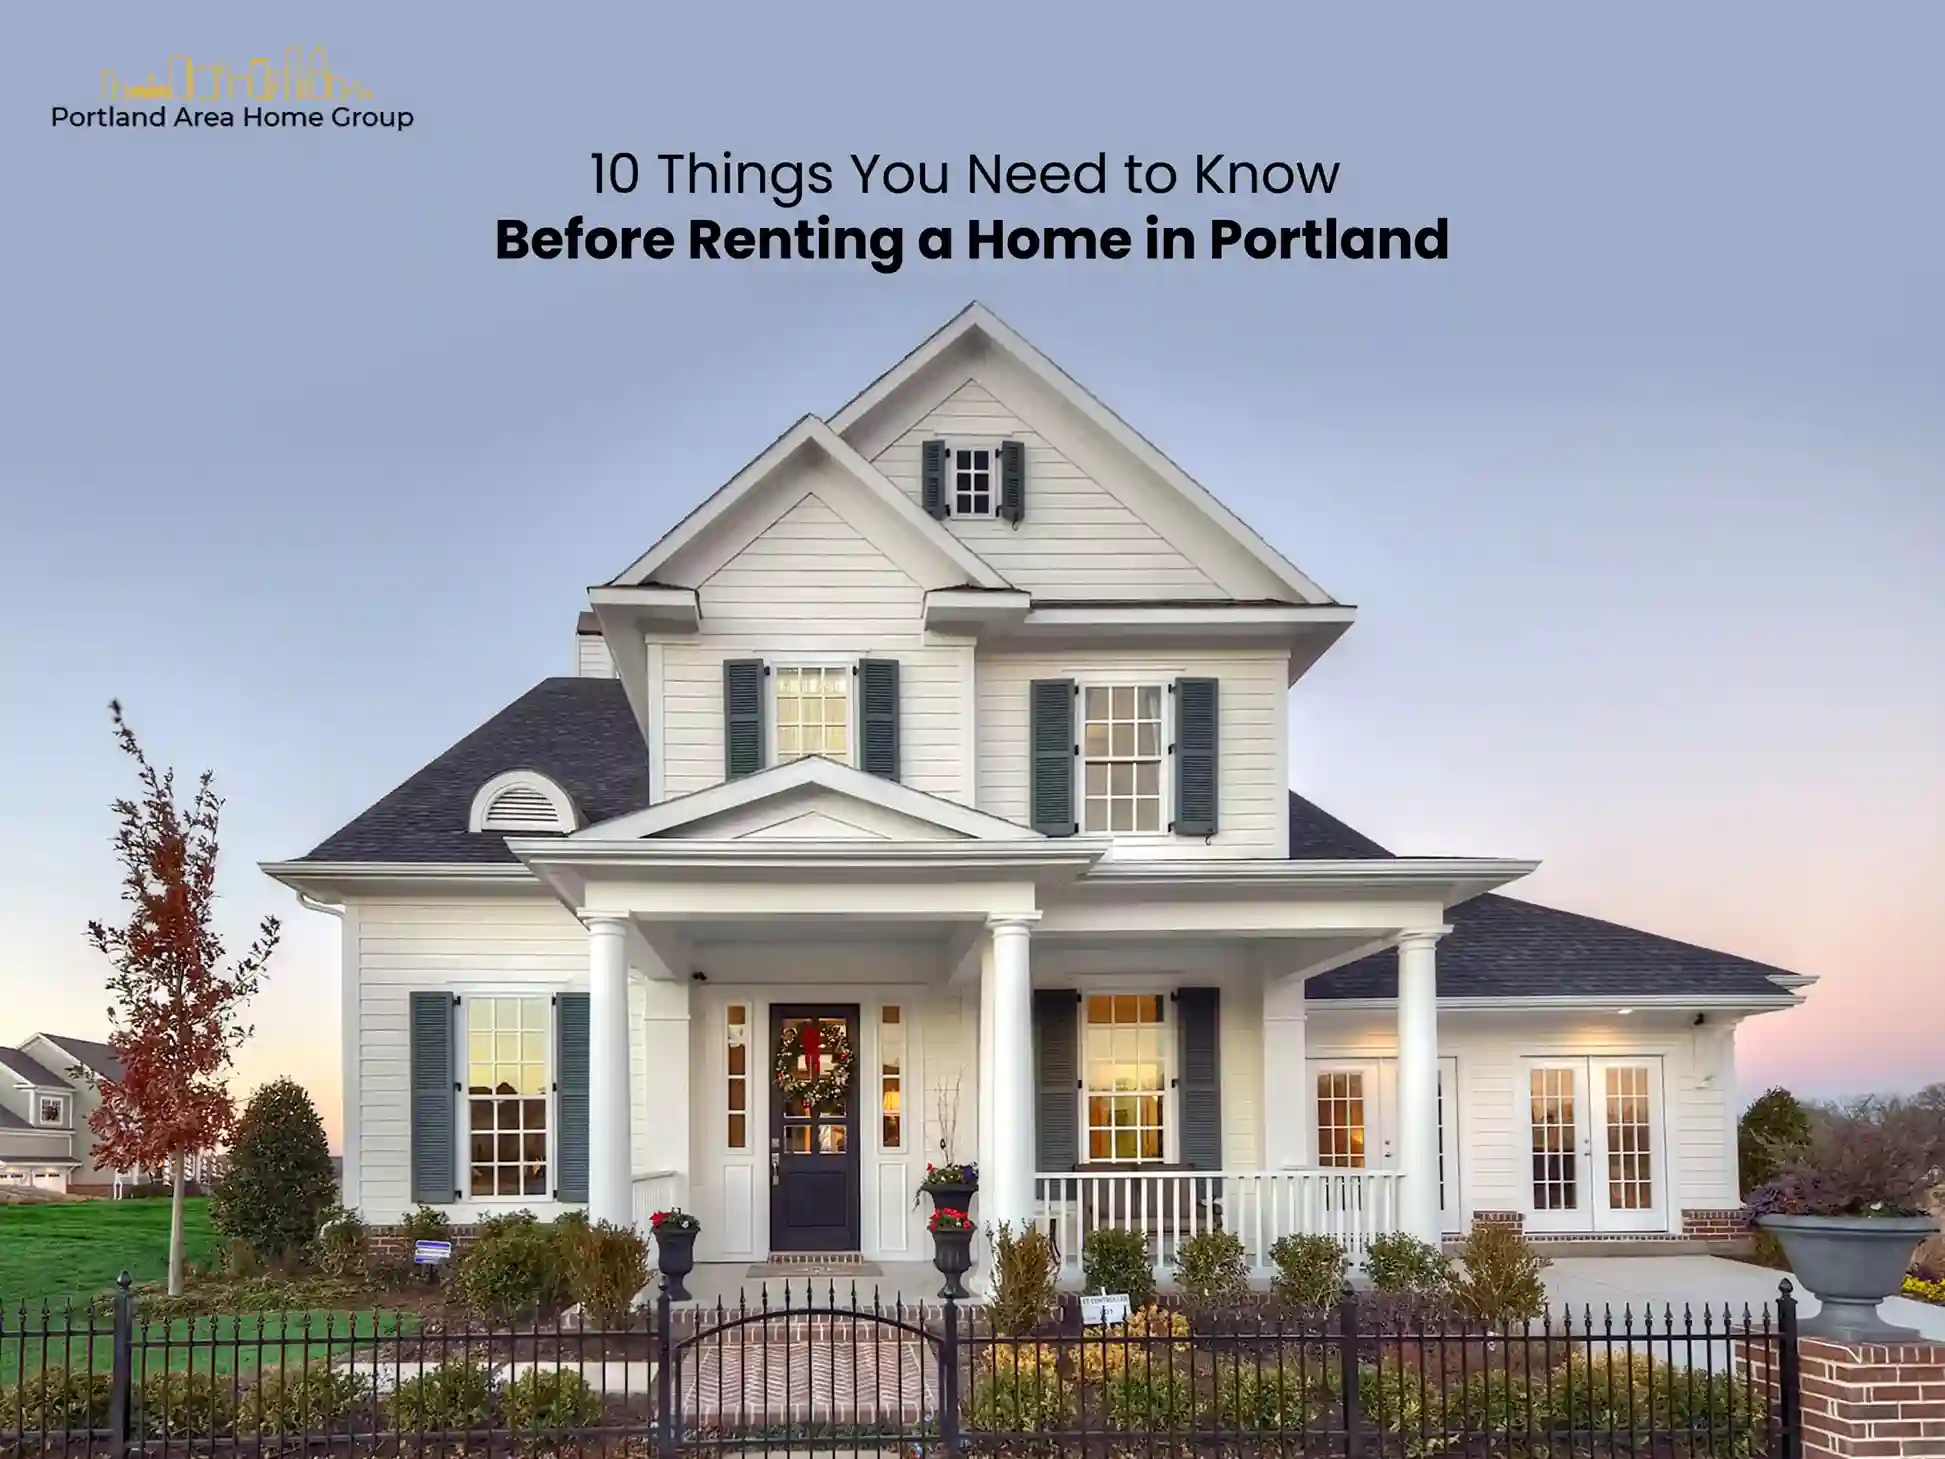 10 Things You Need to Know Before Renting a Home in Portland